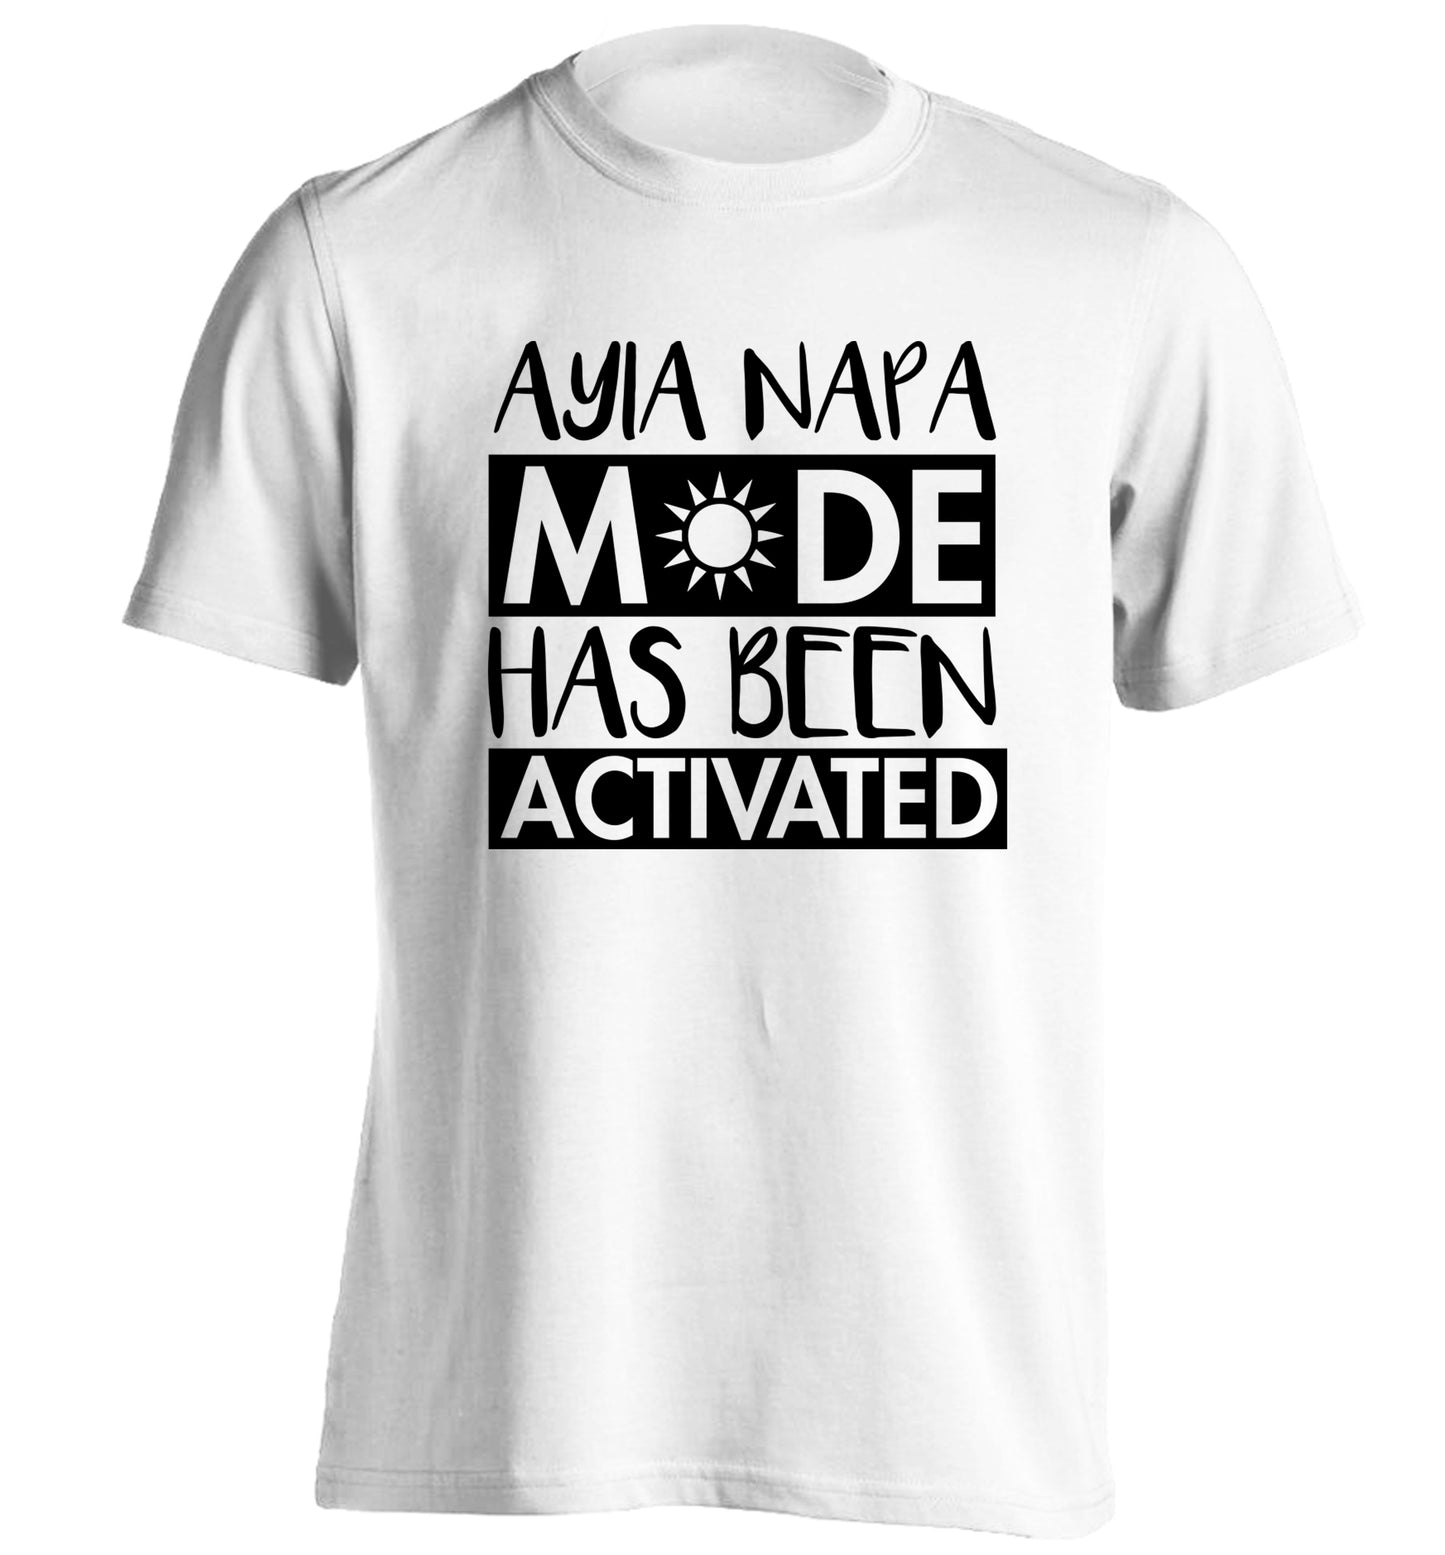 Ayia Napa mode has been activated adults unisex white Tshirt 2XL